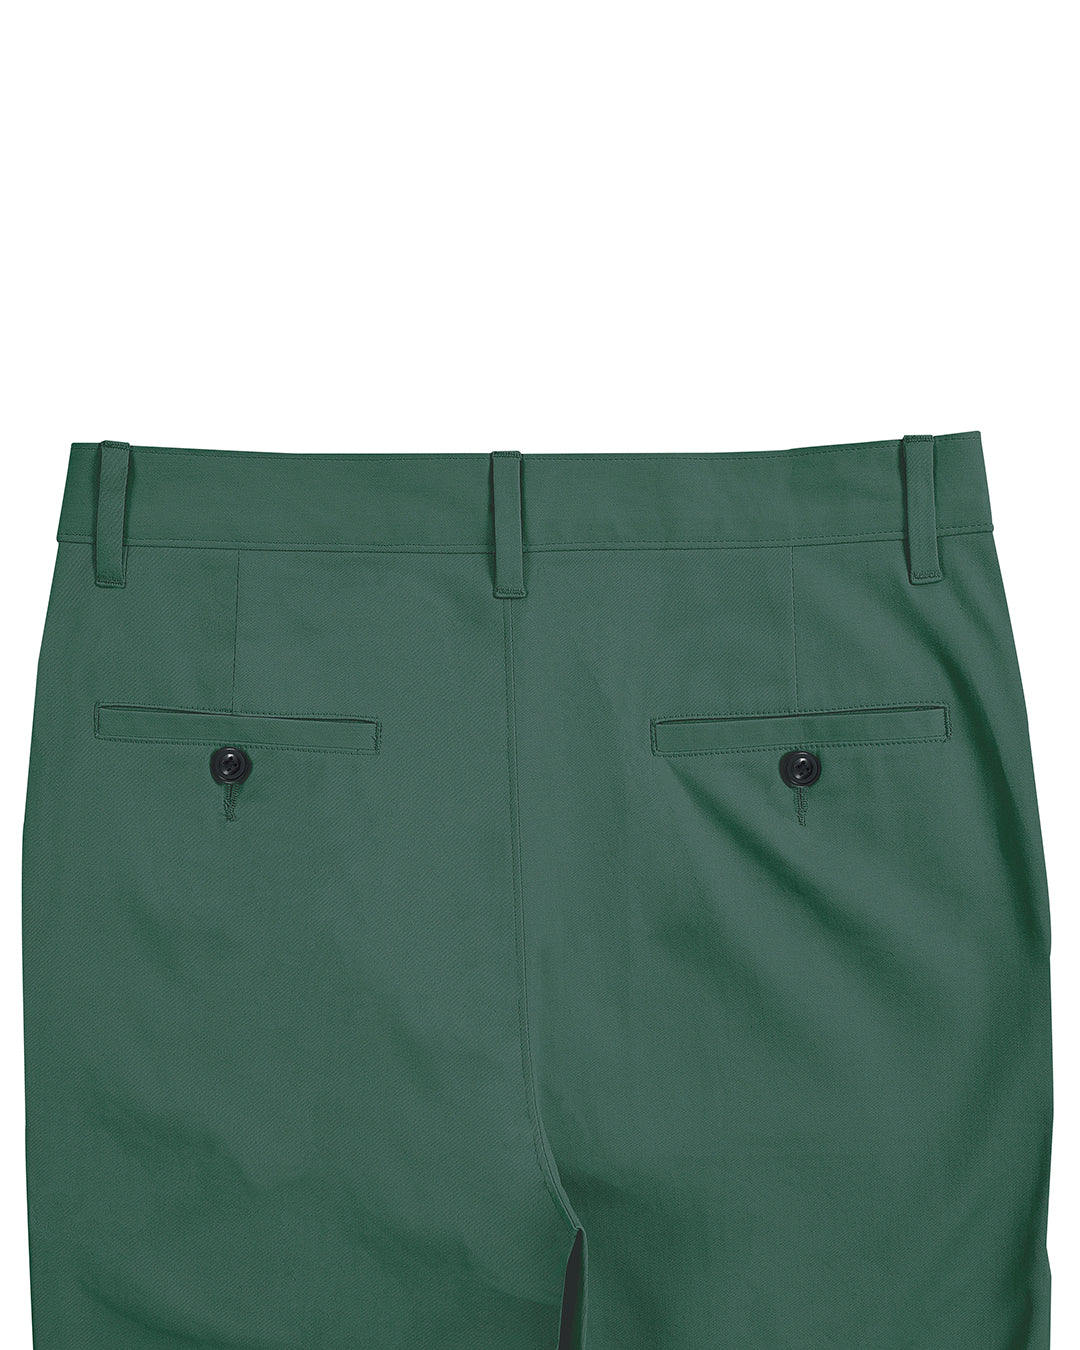 Back view of custom Genoa Chino pants for men by Luxire in fern green